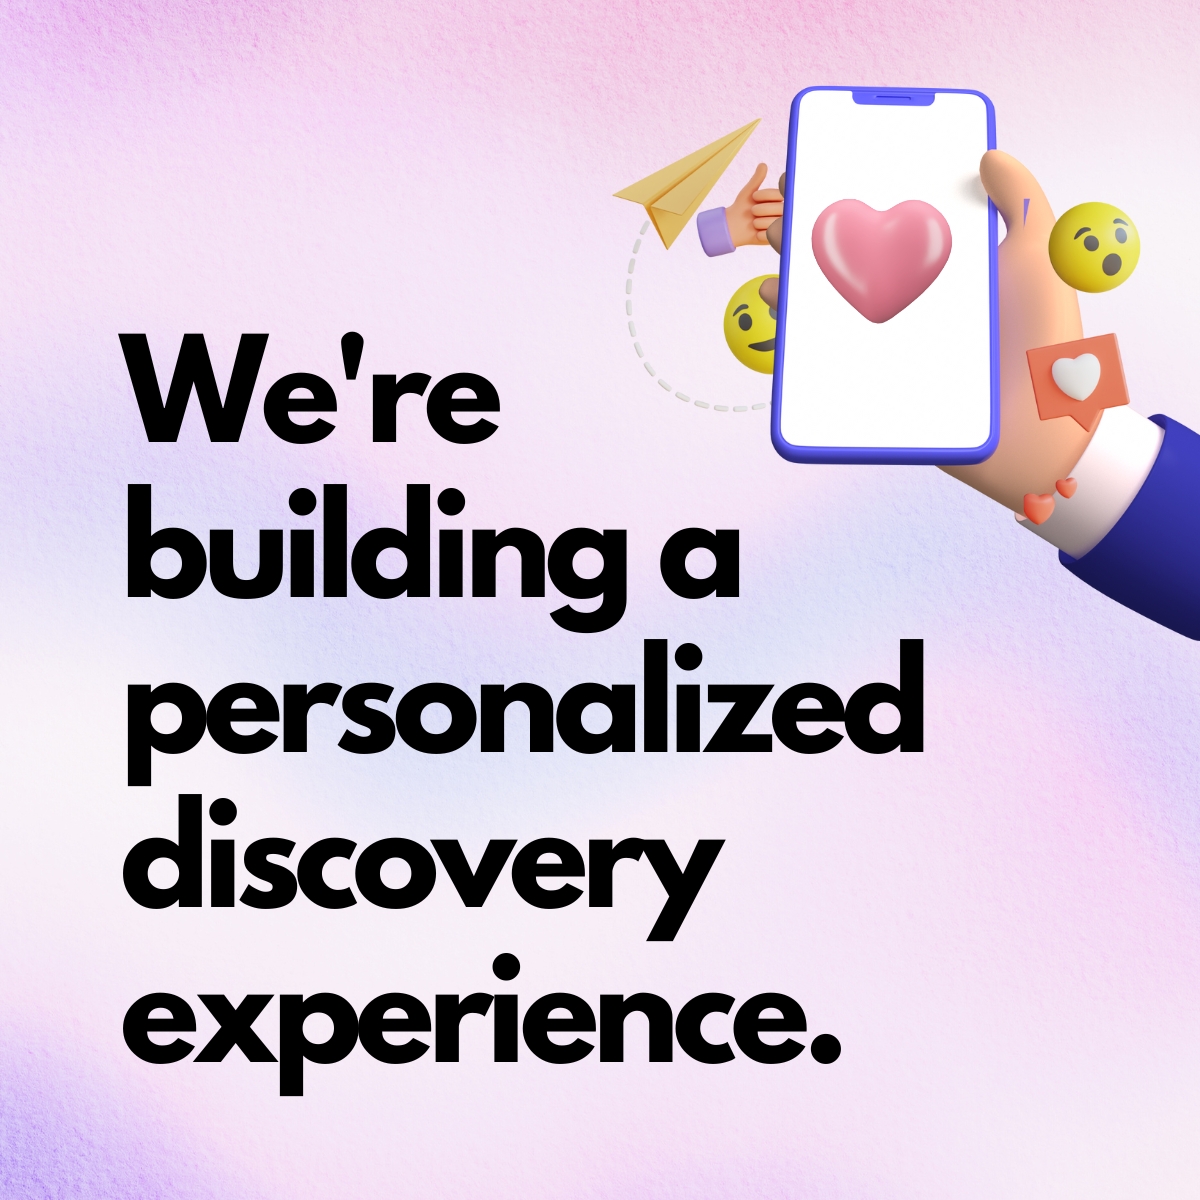 Text against gradient background with 3D image of cell phone, stating that YesPlz builds personalized eCommerce product discovery